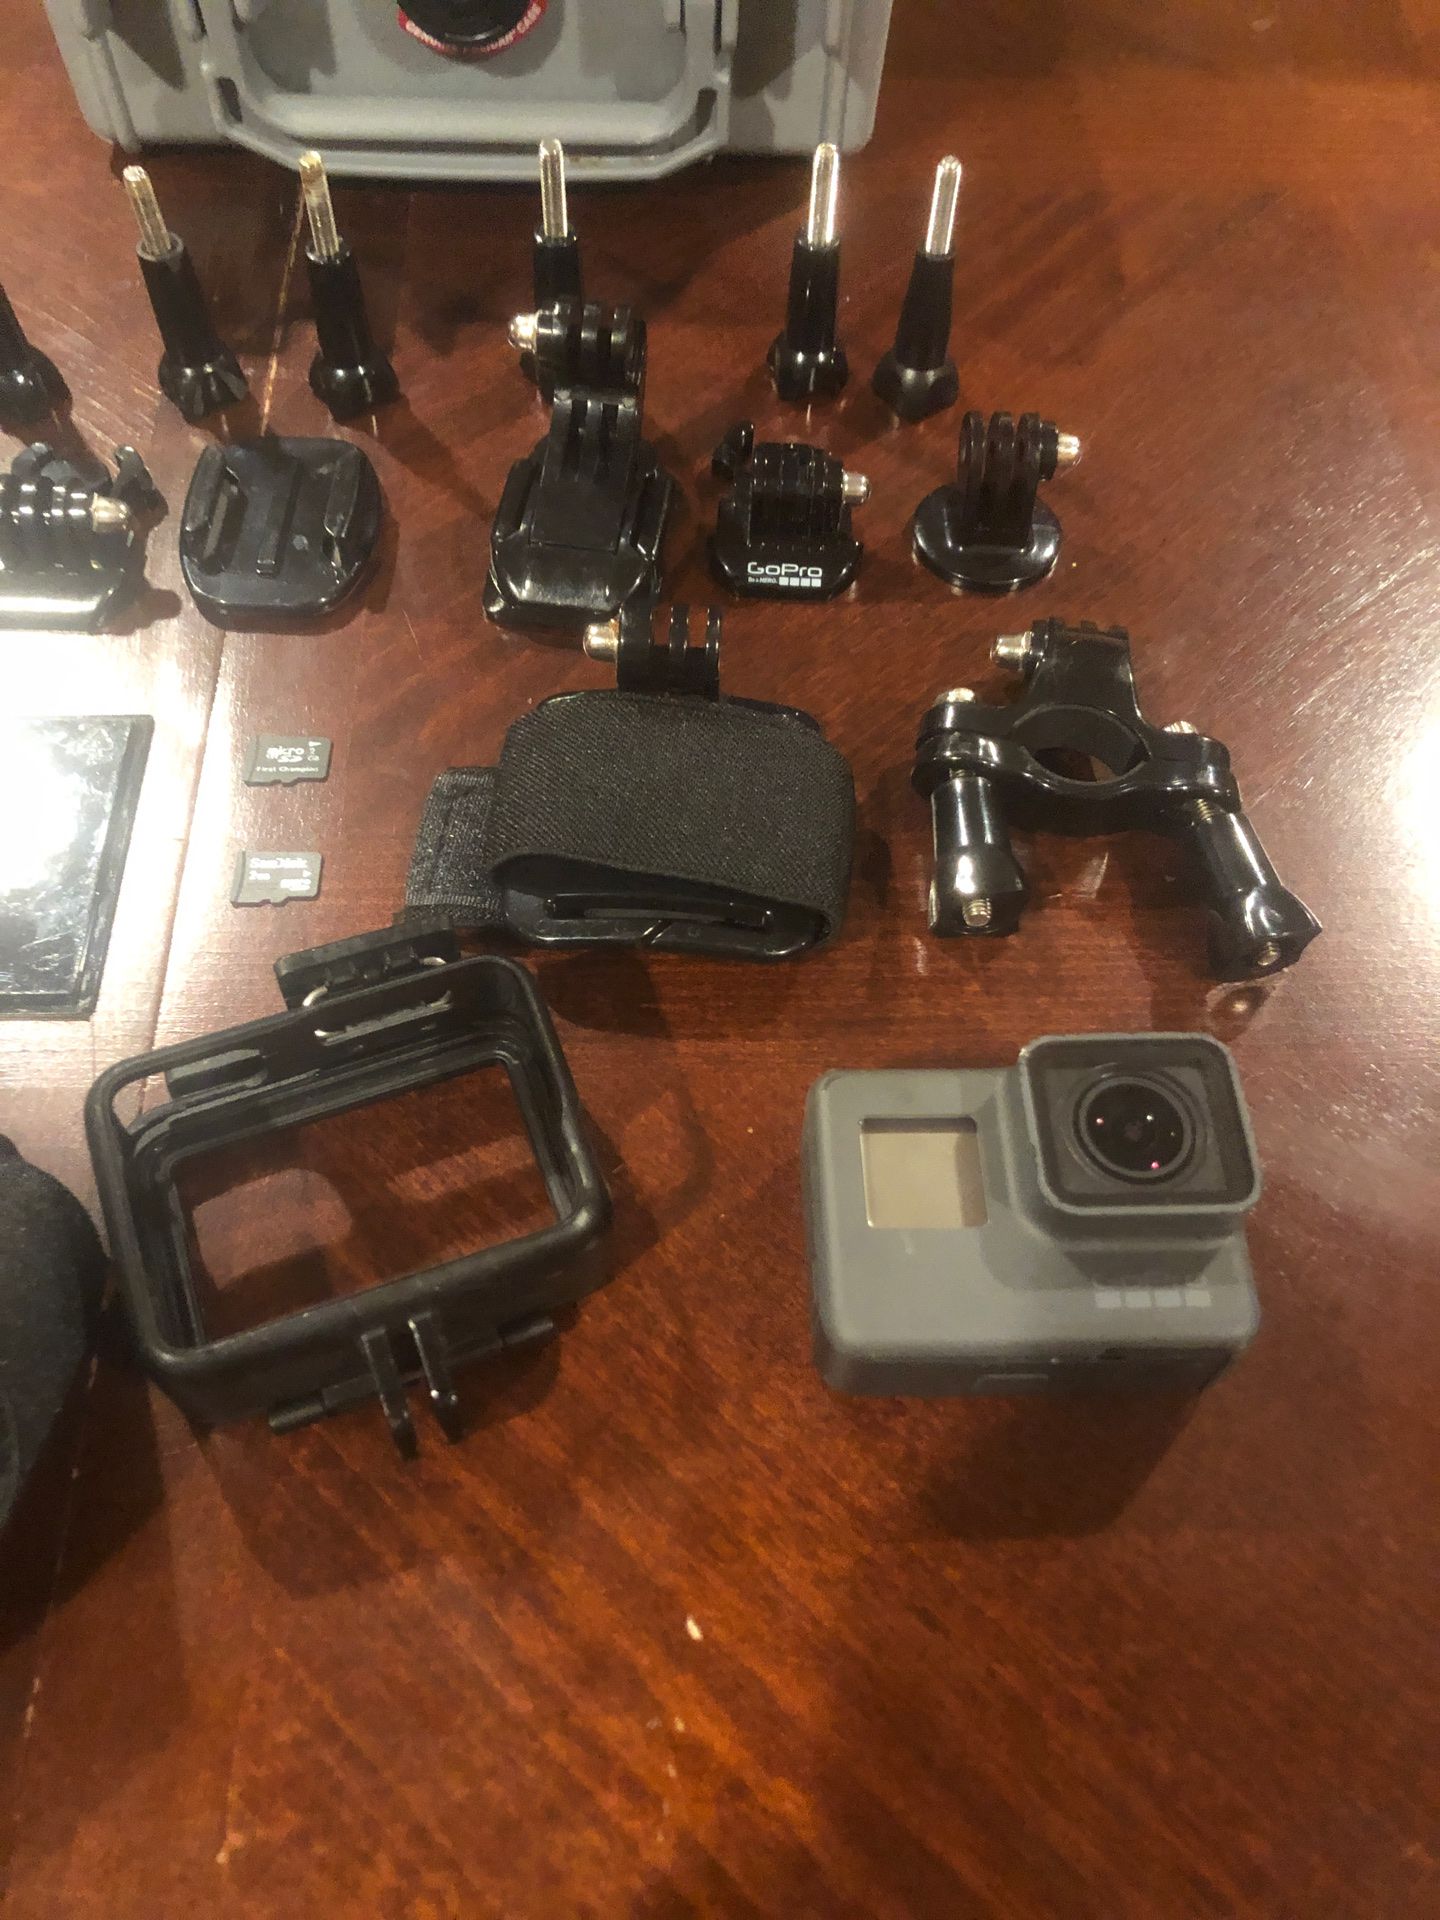 Gopro hero 5 comes with lots of acc and pelican case